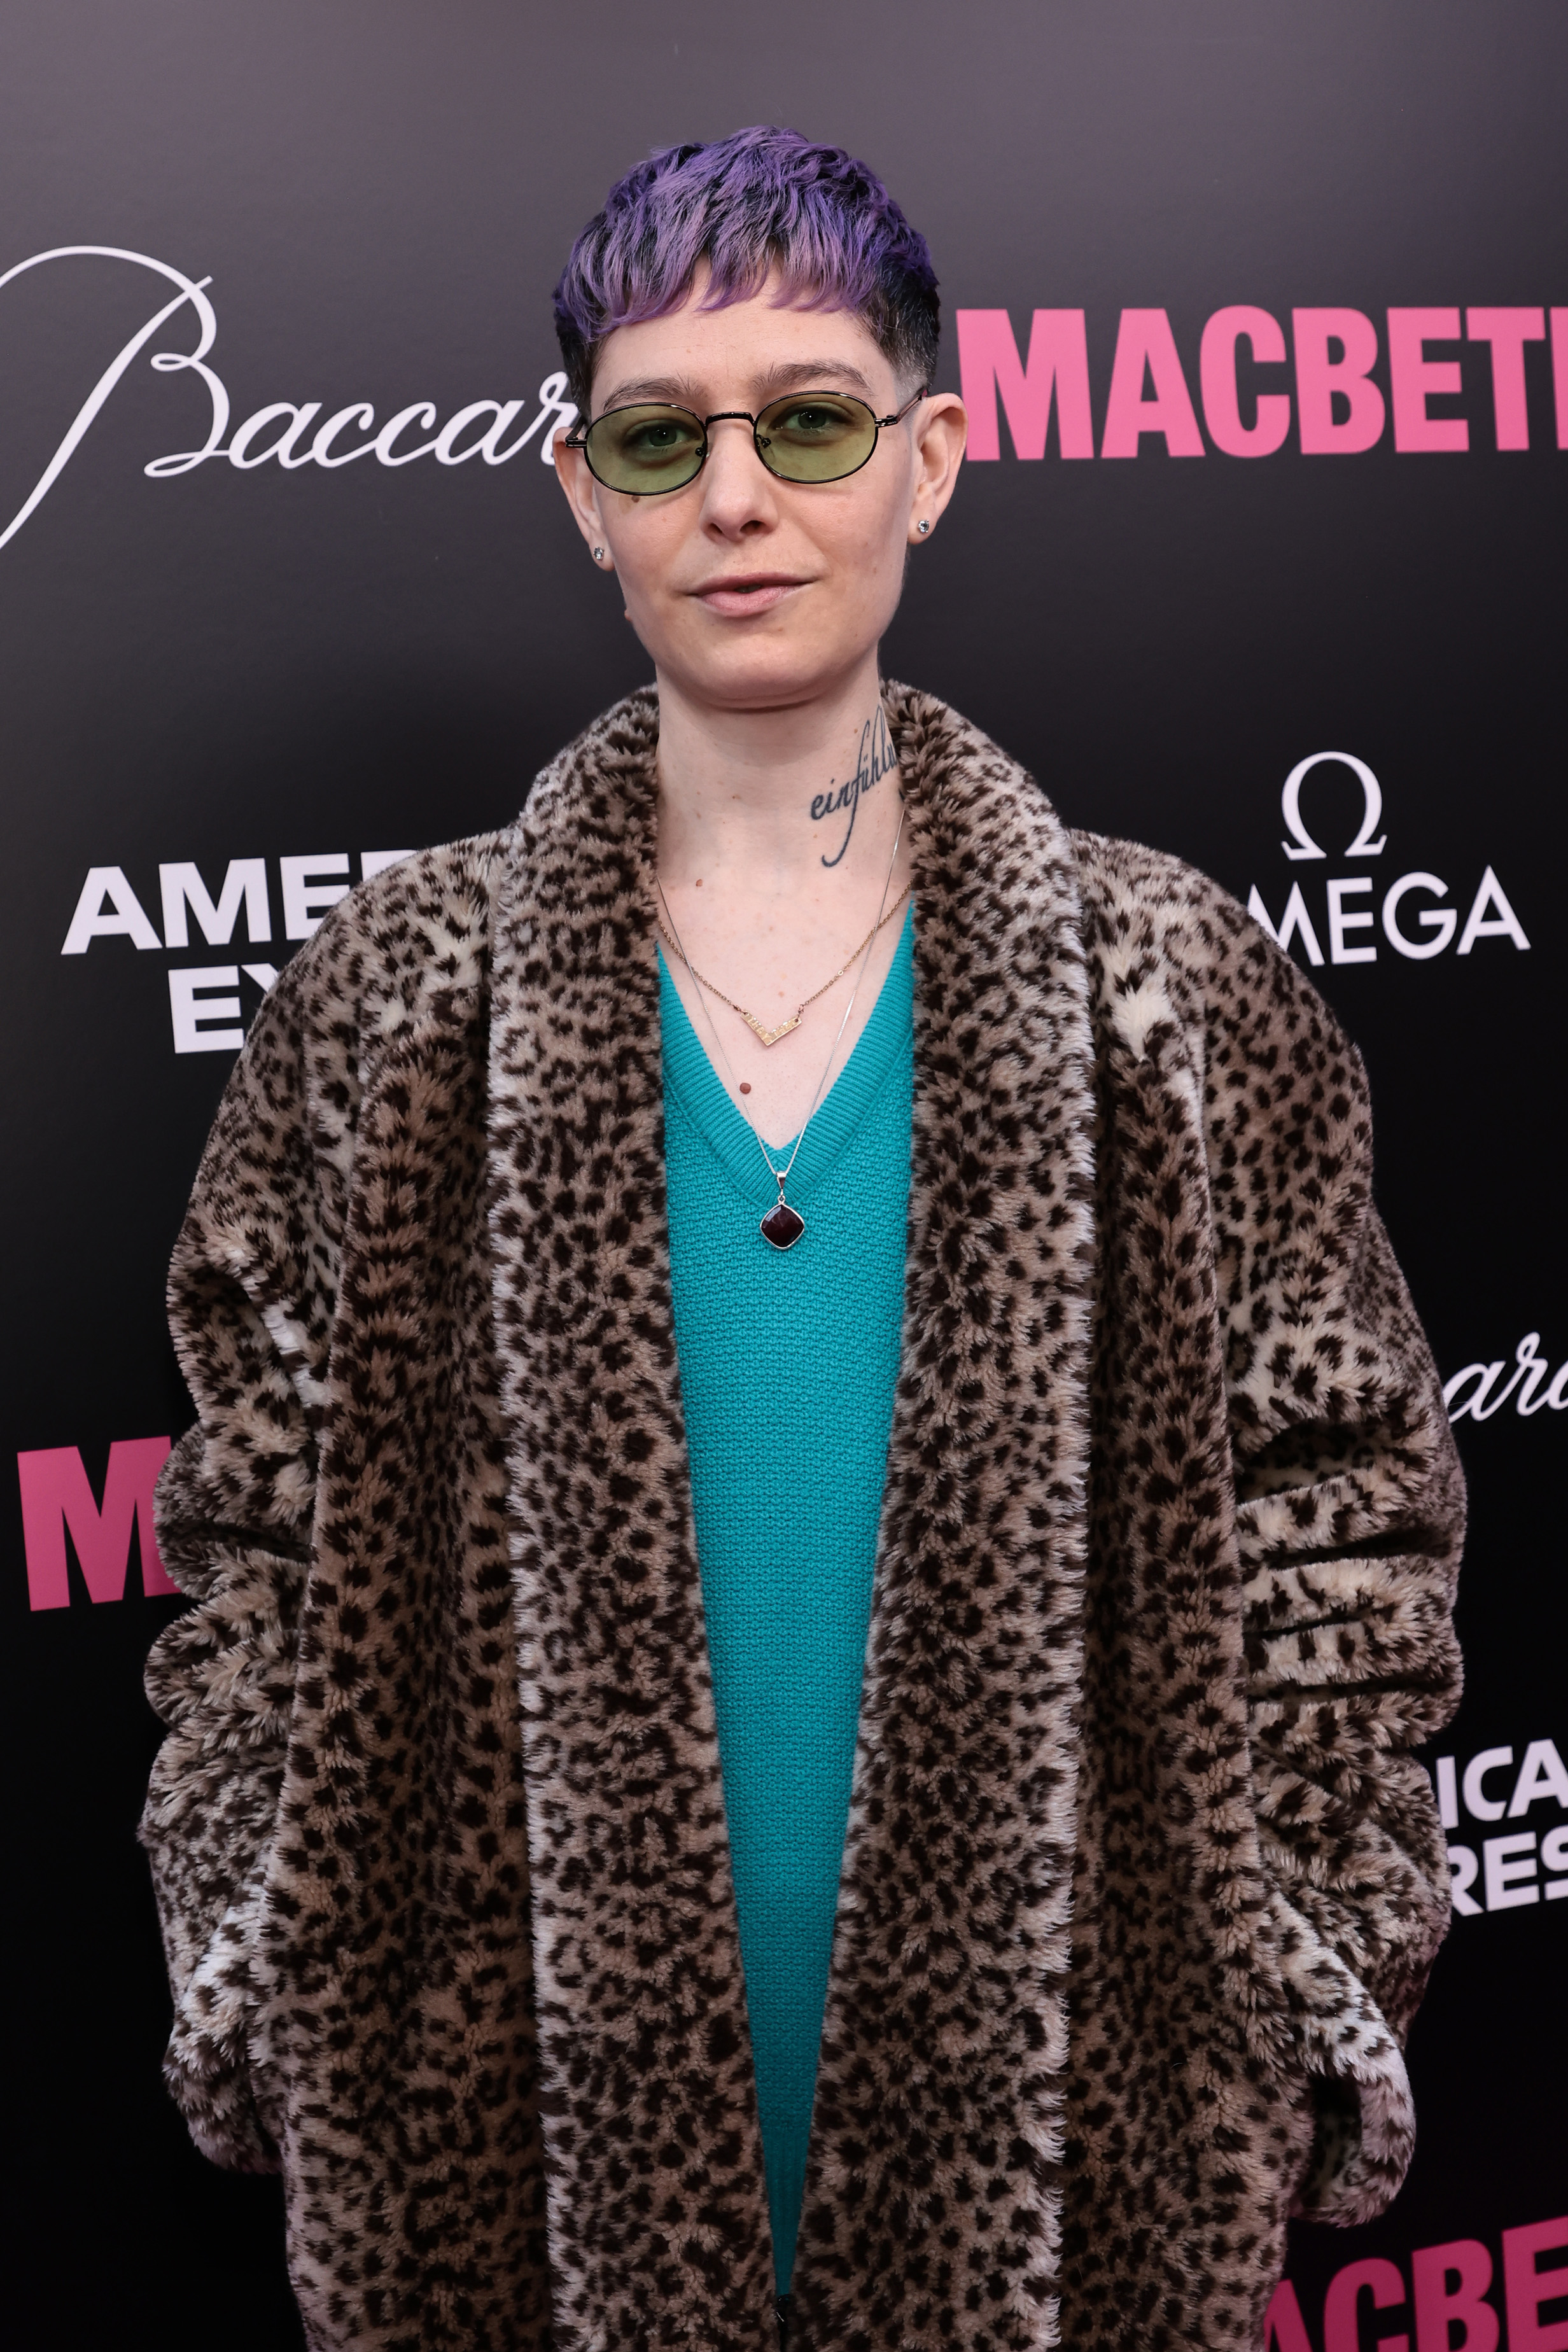 Asia Kate Dillon at the Broadway opening night of "MacBeth" on April 28, 2022, in New York City. | Source: Getty Images